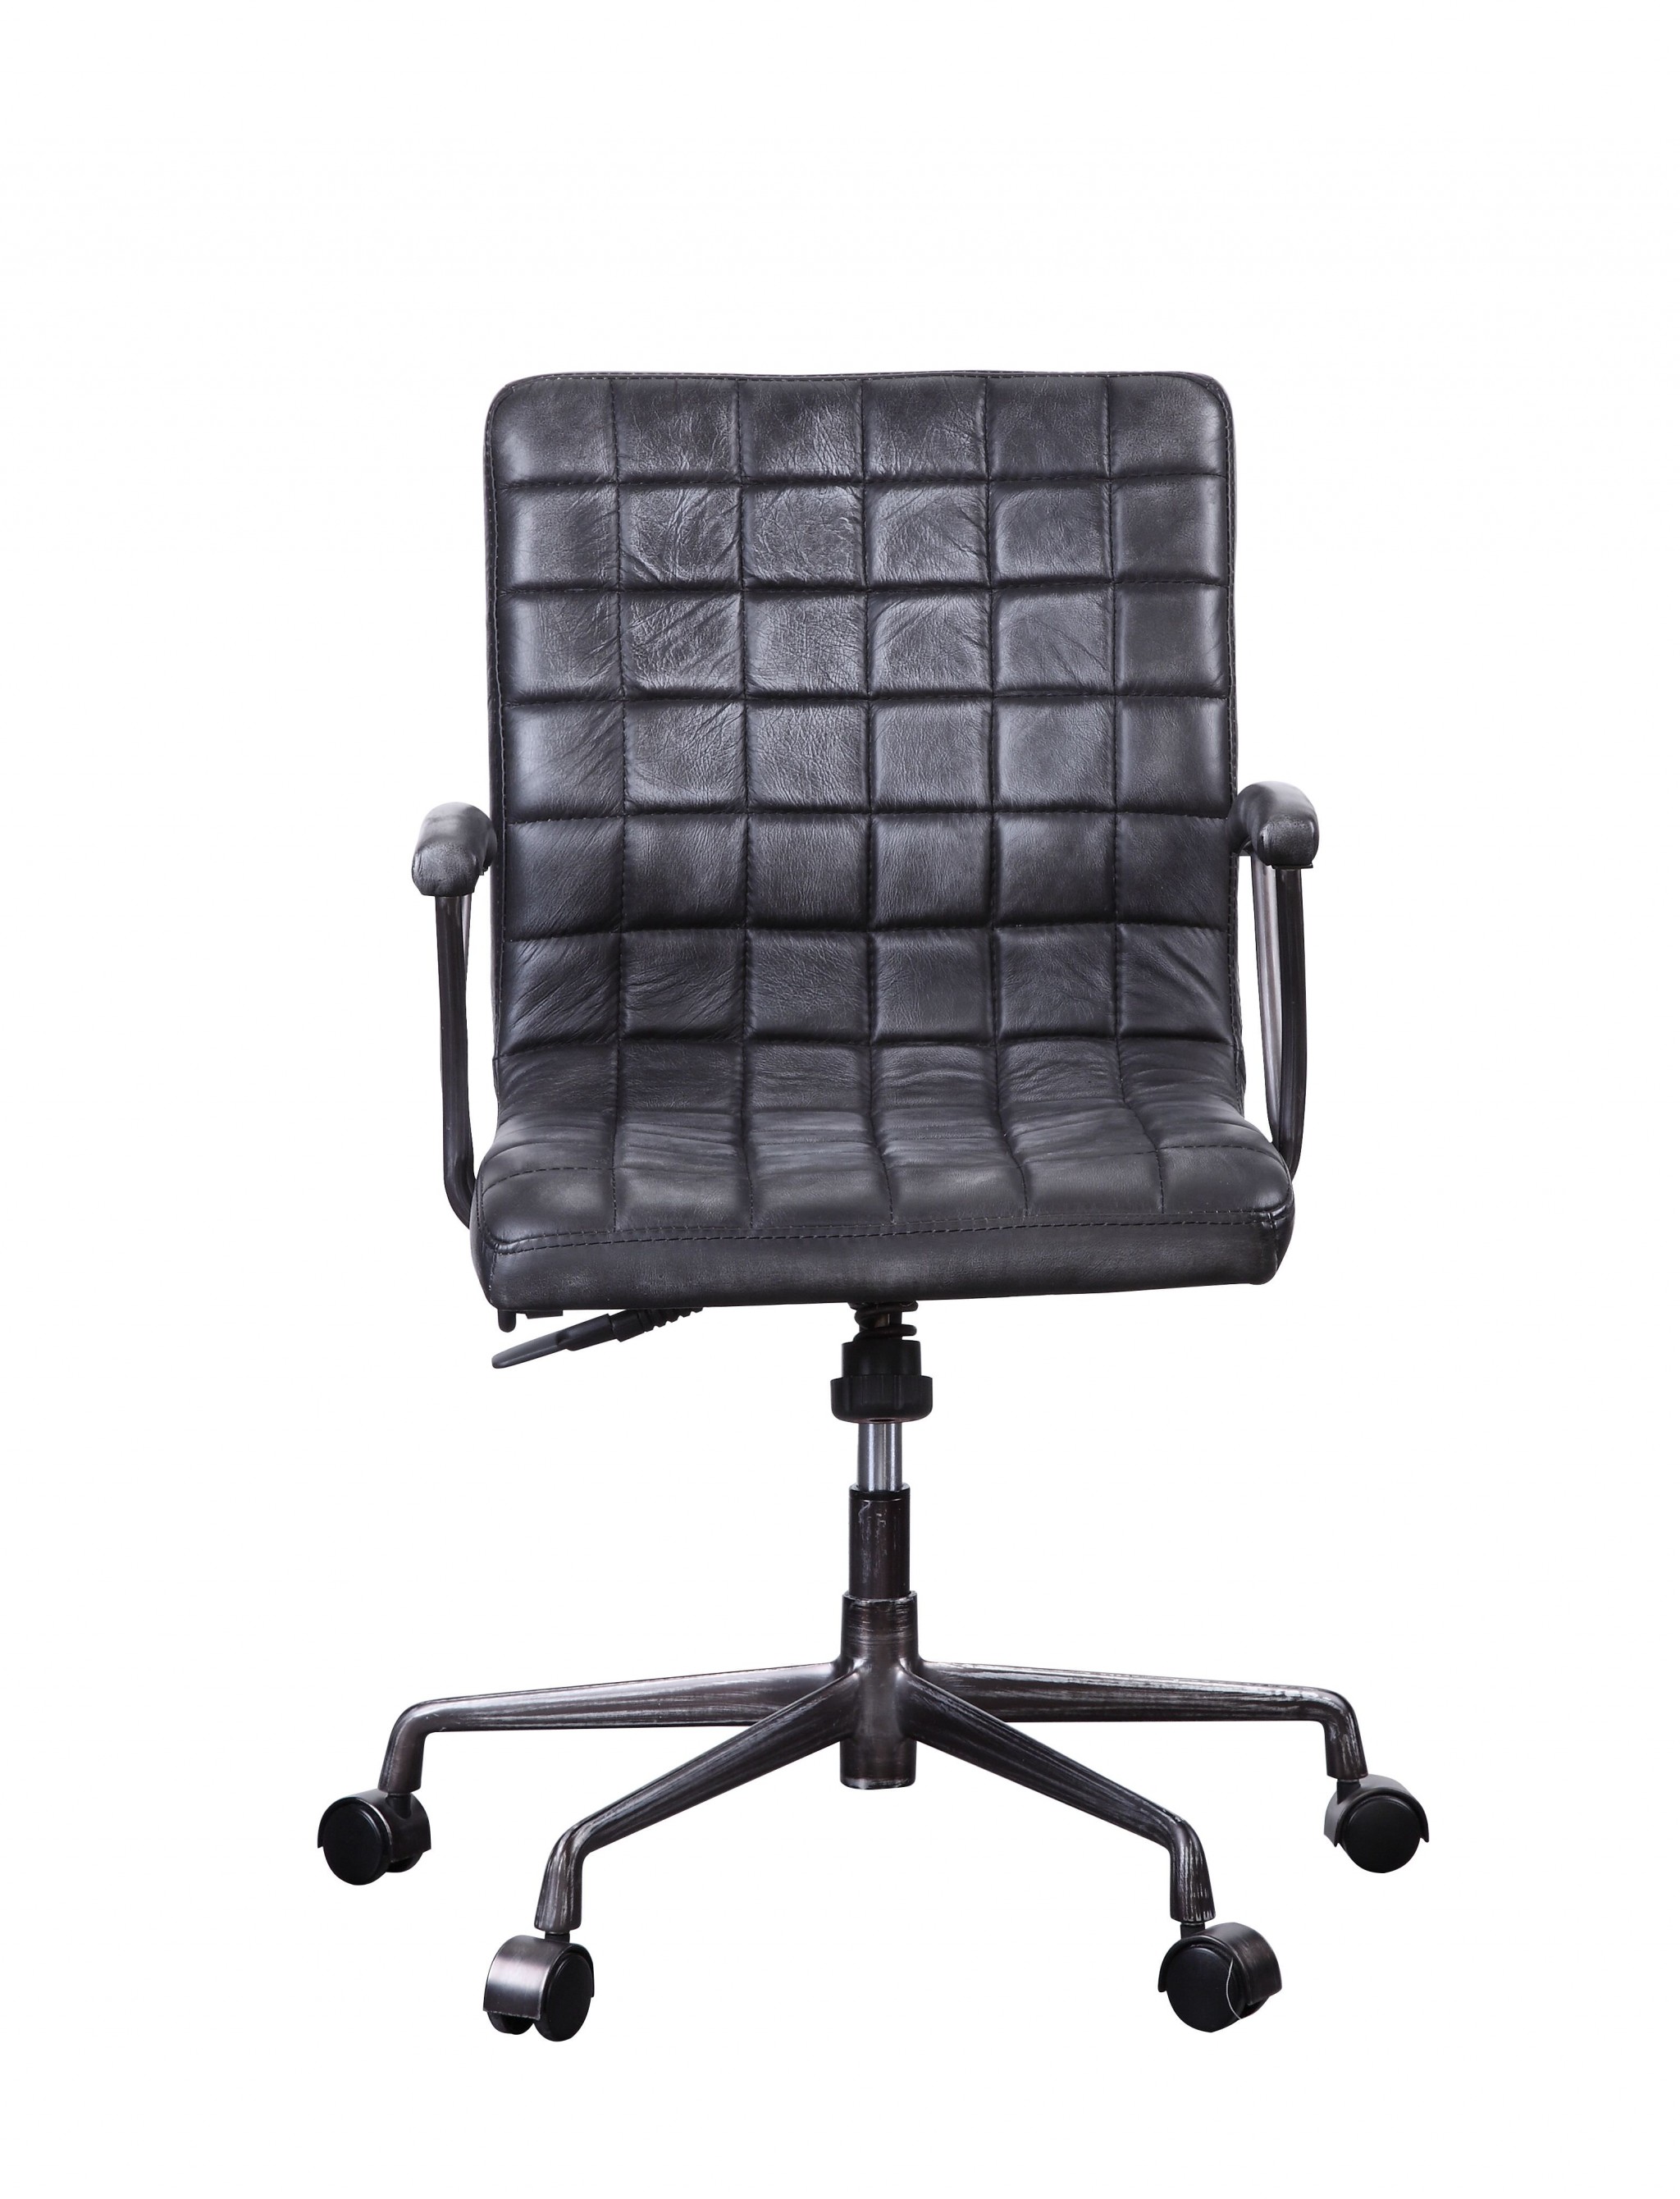 24" X 25" X 36" Vintage Black Top Grain Leather Aluminum Metal Upholstered (Seat) Casters Engineered Wood Executive Office Chair